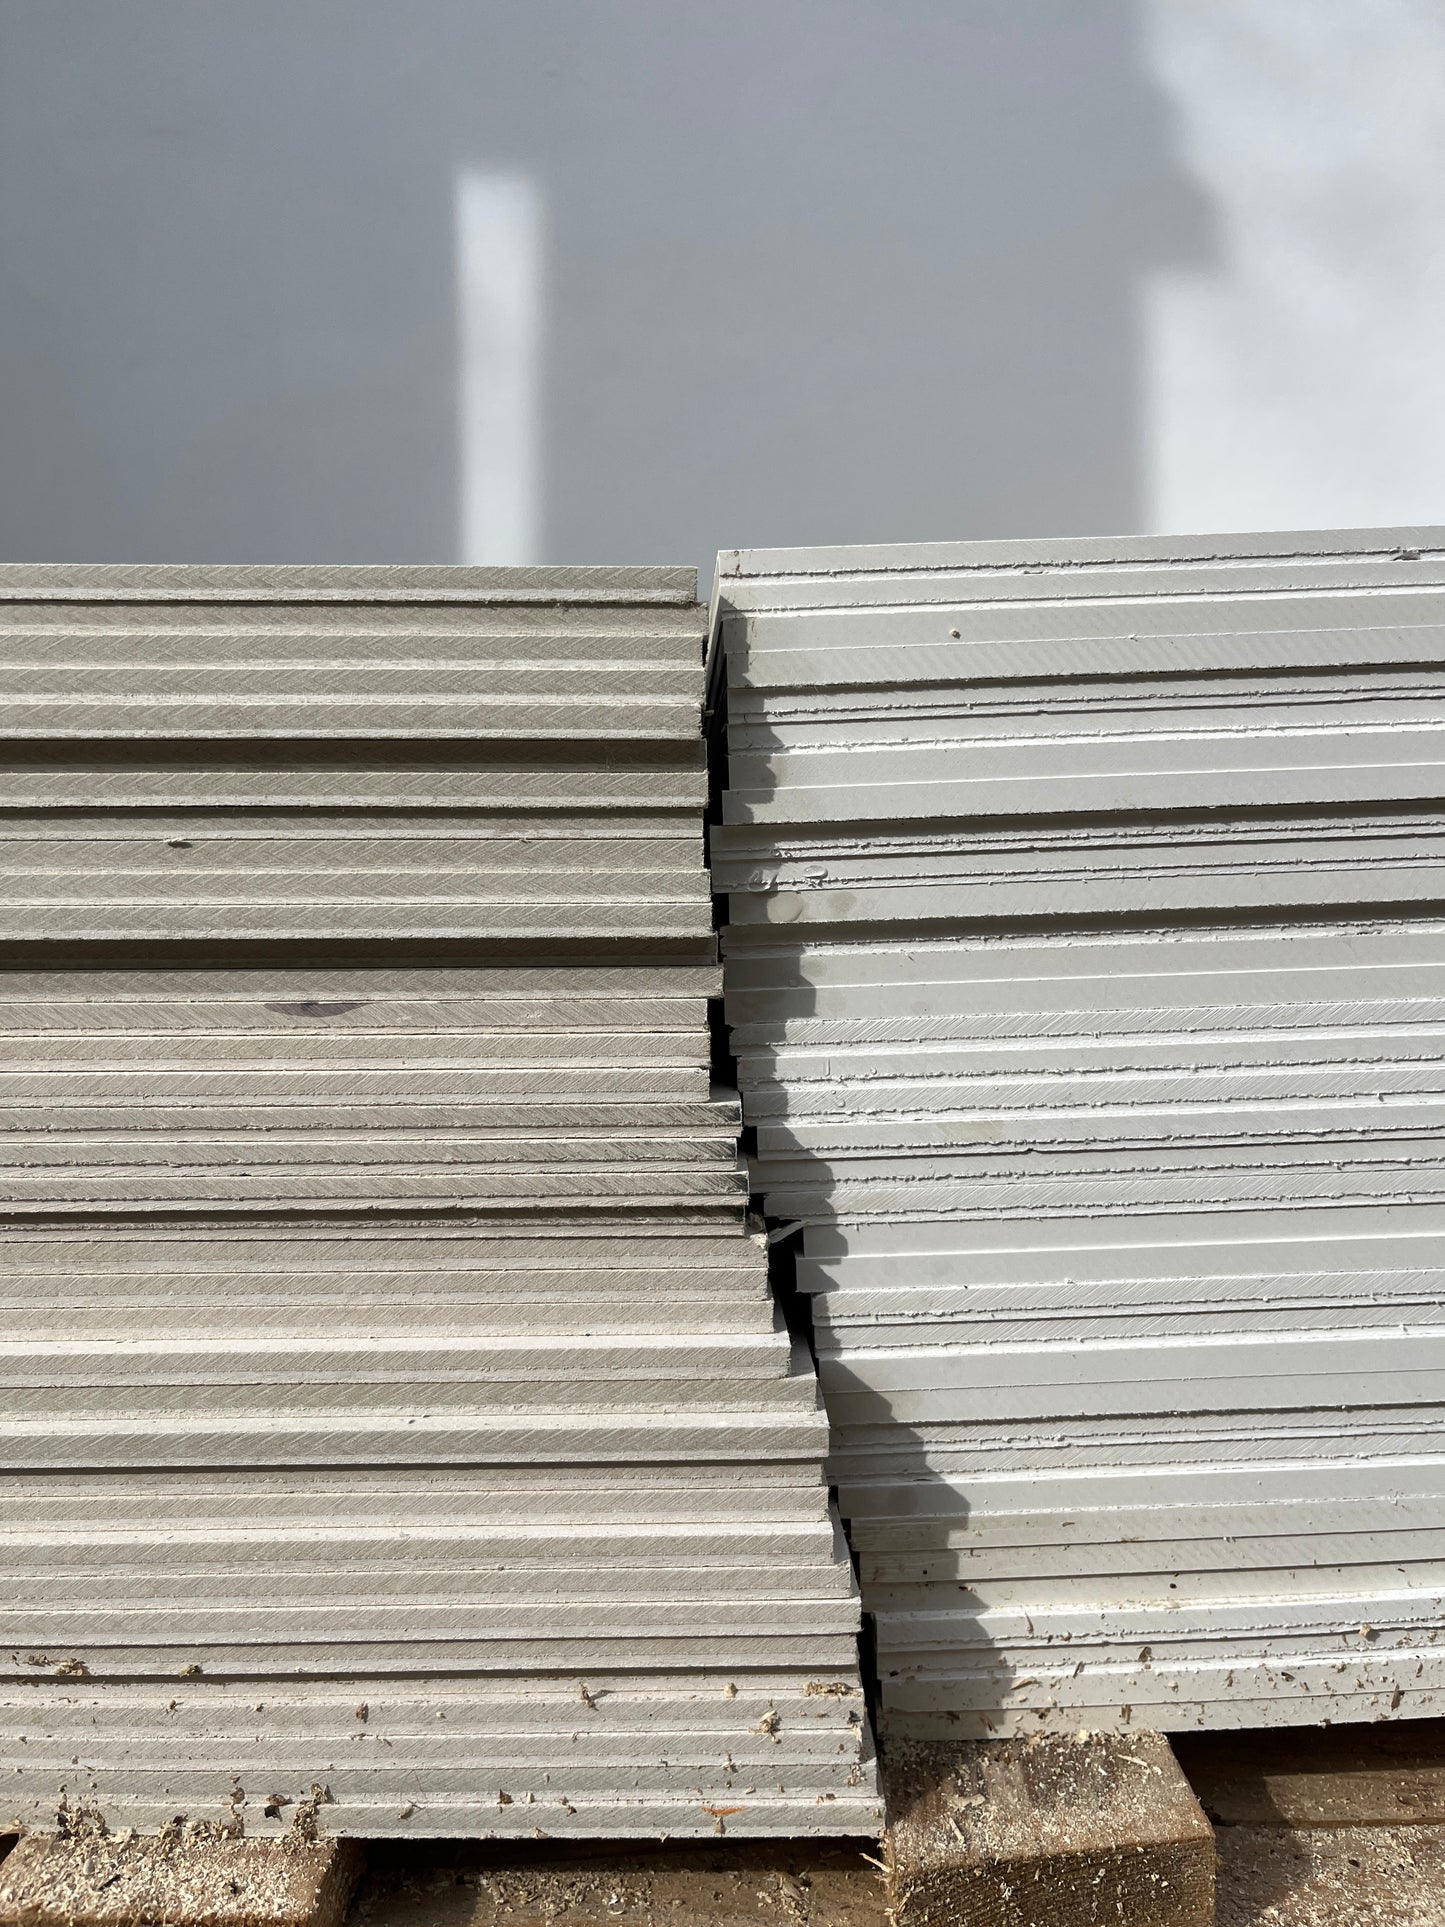 USED UP | Equitone │ Fibre Cement Panels, 6.6